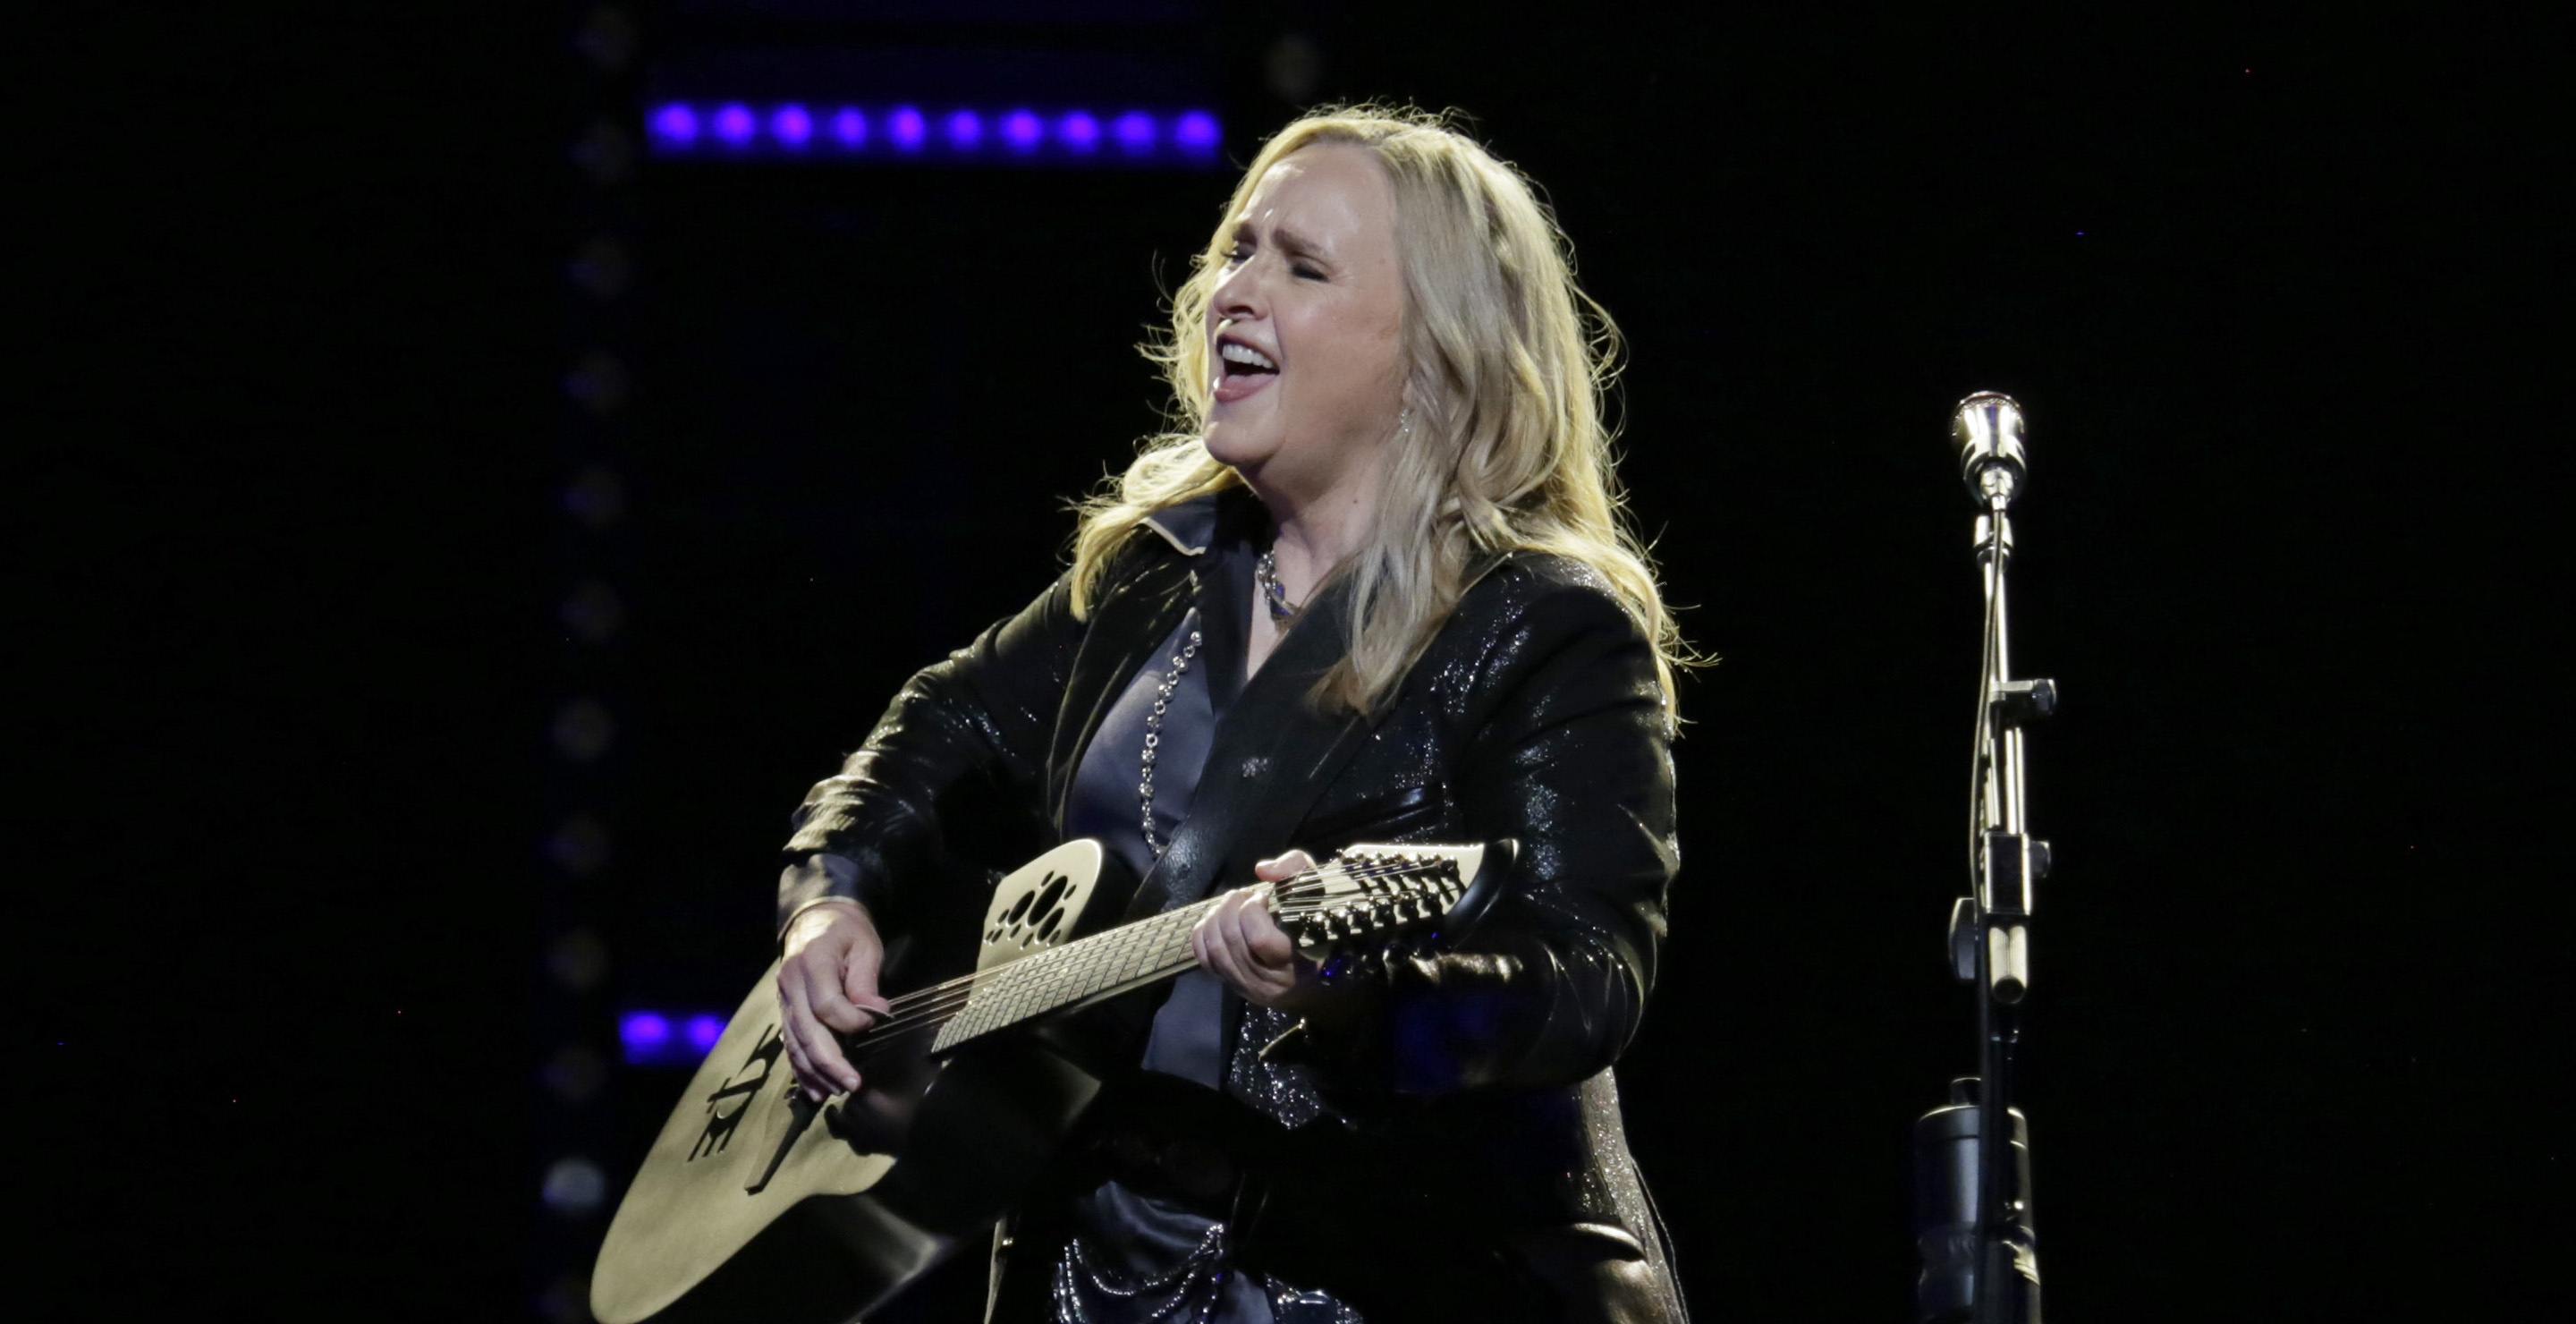 How Johnny Cash Inspired Melissa Etheridge To Finally Make This Career Move